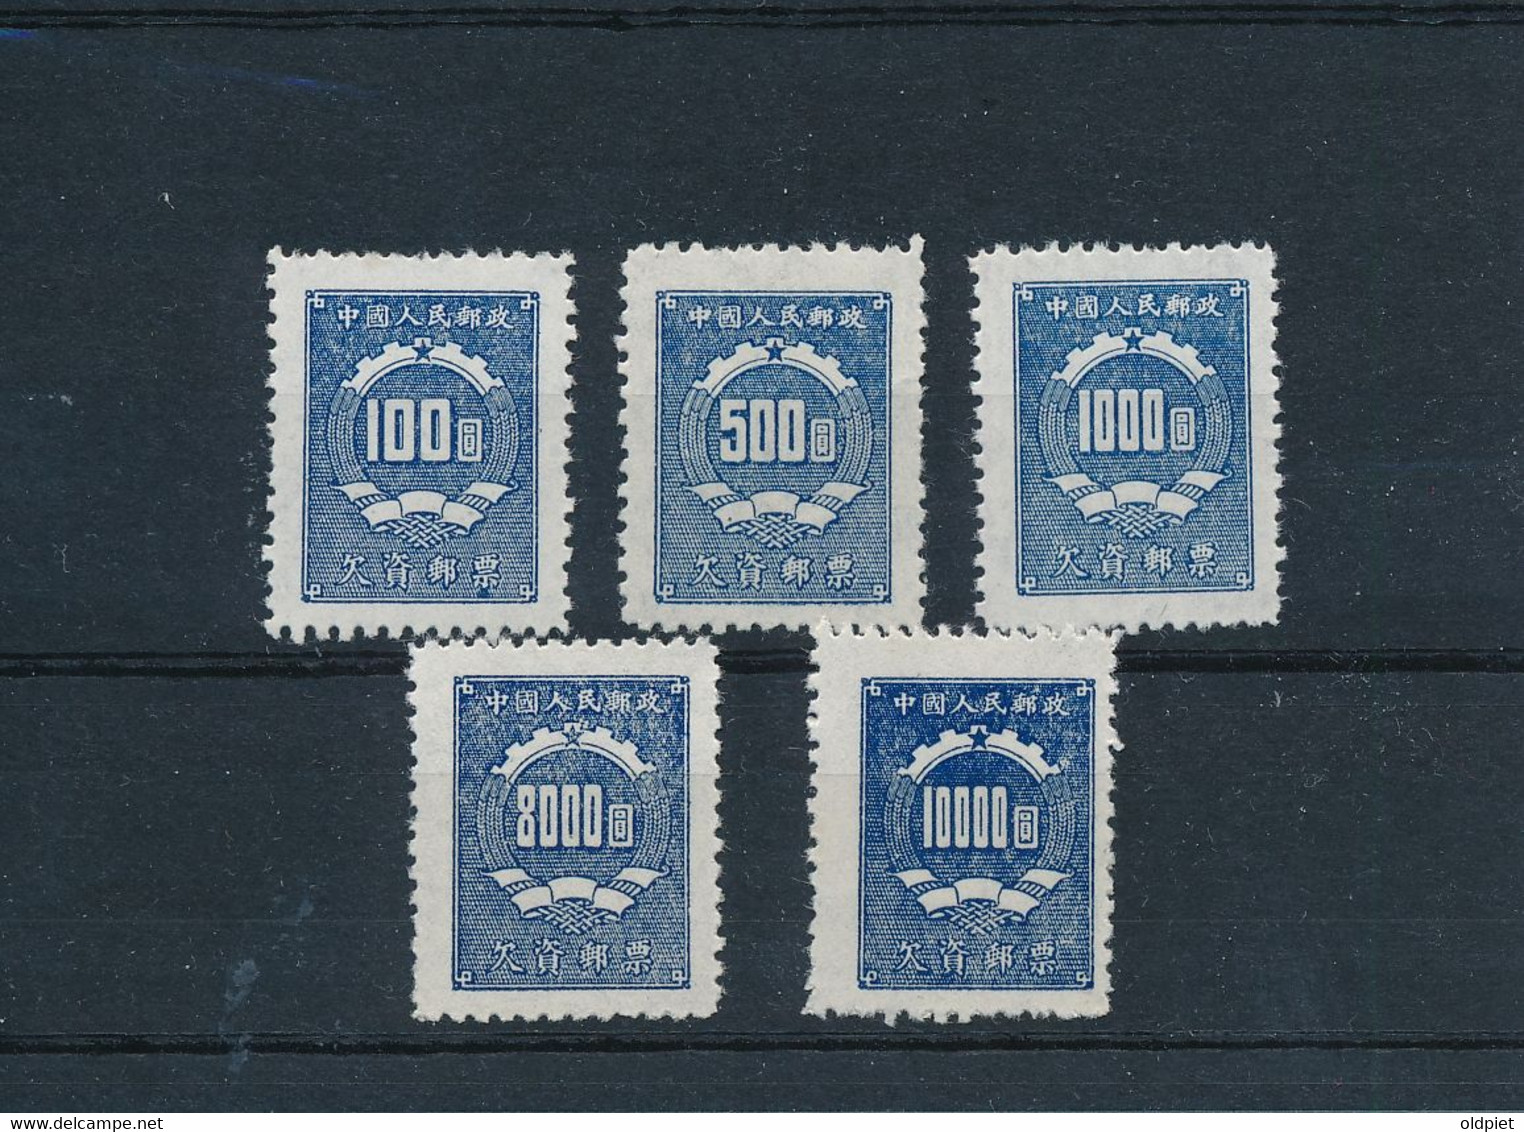 P.R. CHINA Postage Due Stamps Portomarken 1950 - Mi # 1, 3, 5, 8, 9 Mint No Gum (*) Digits In The Coat Of Arms - Postage Due